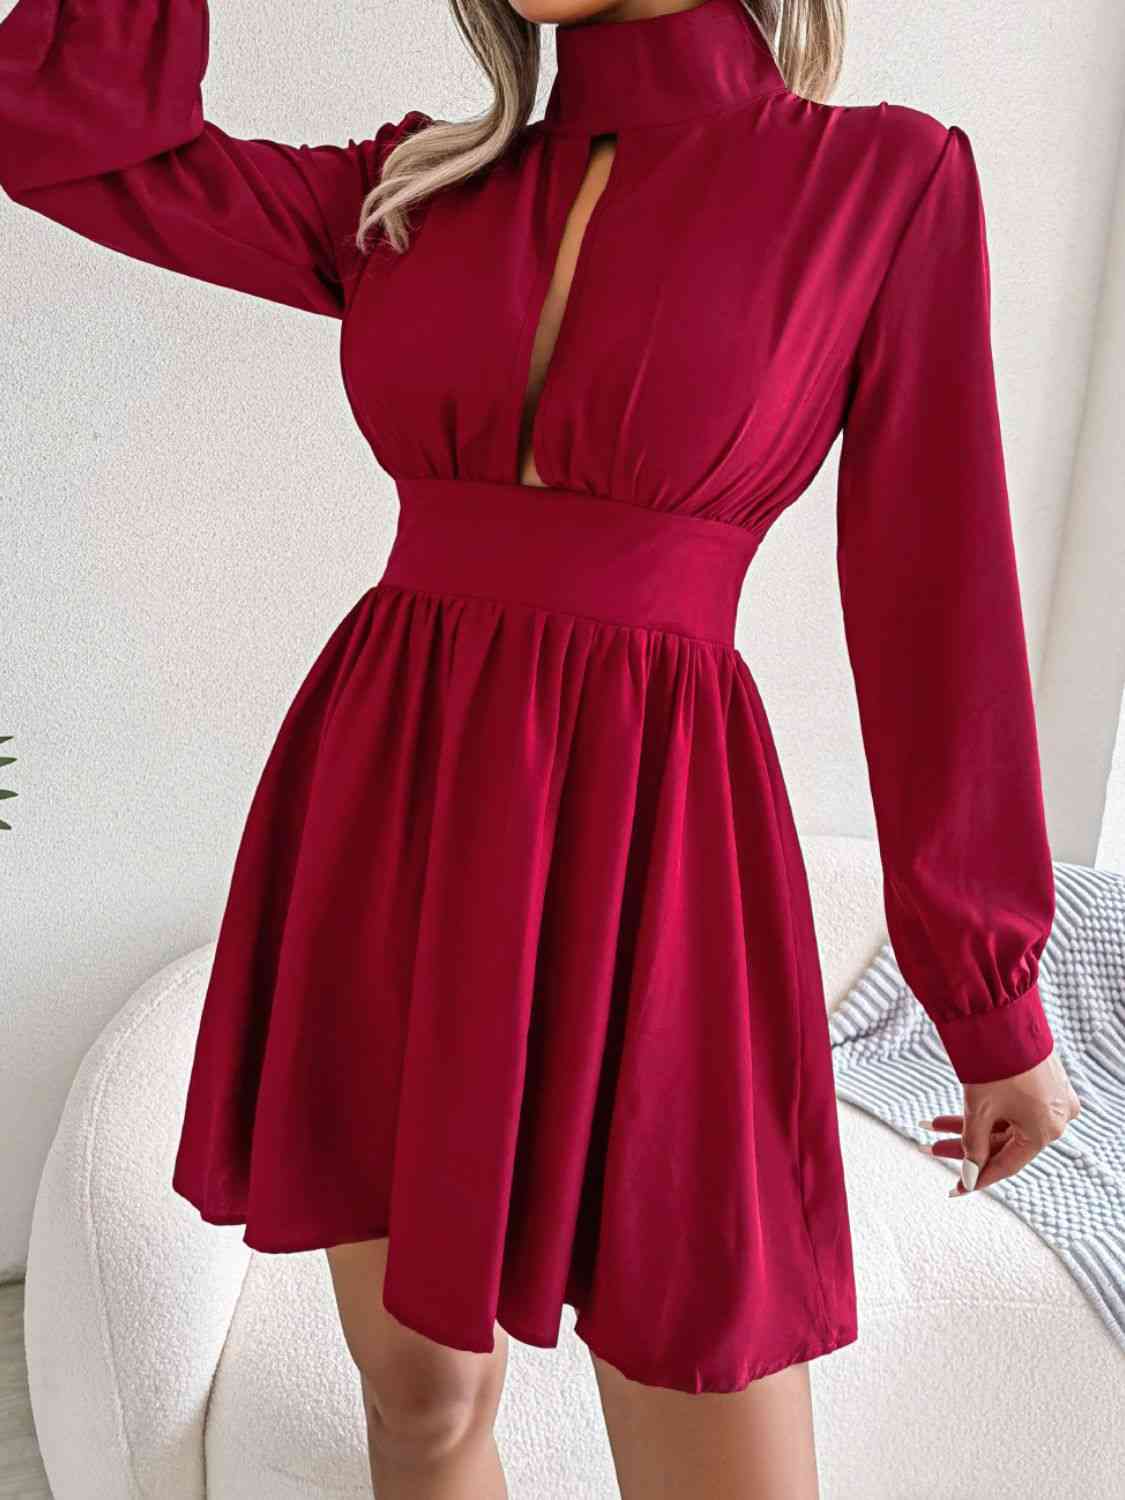 a woman wearing a red dress with a cut out neckline